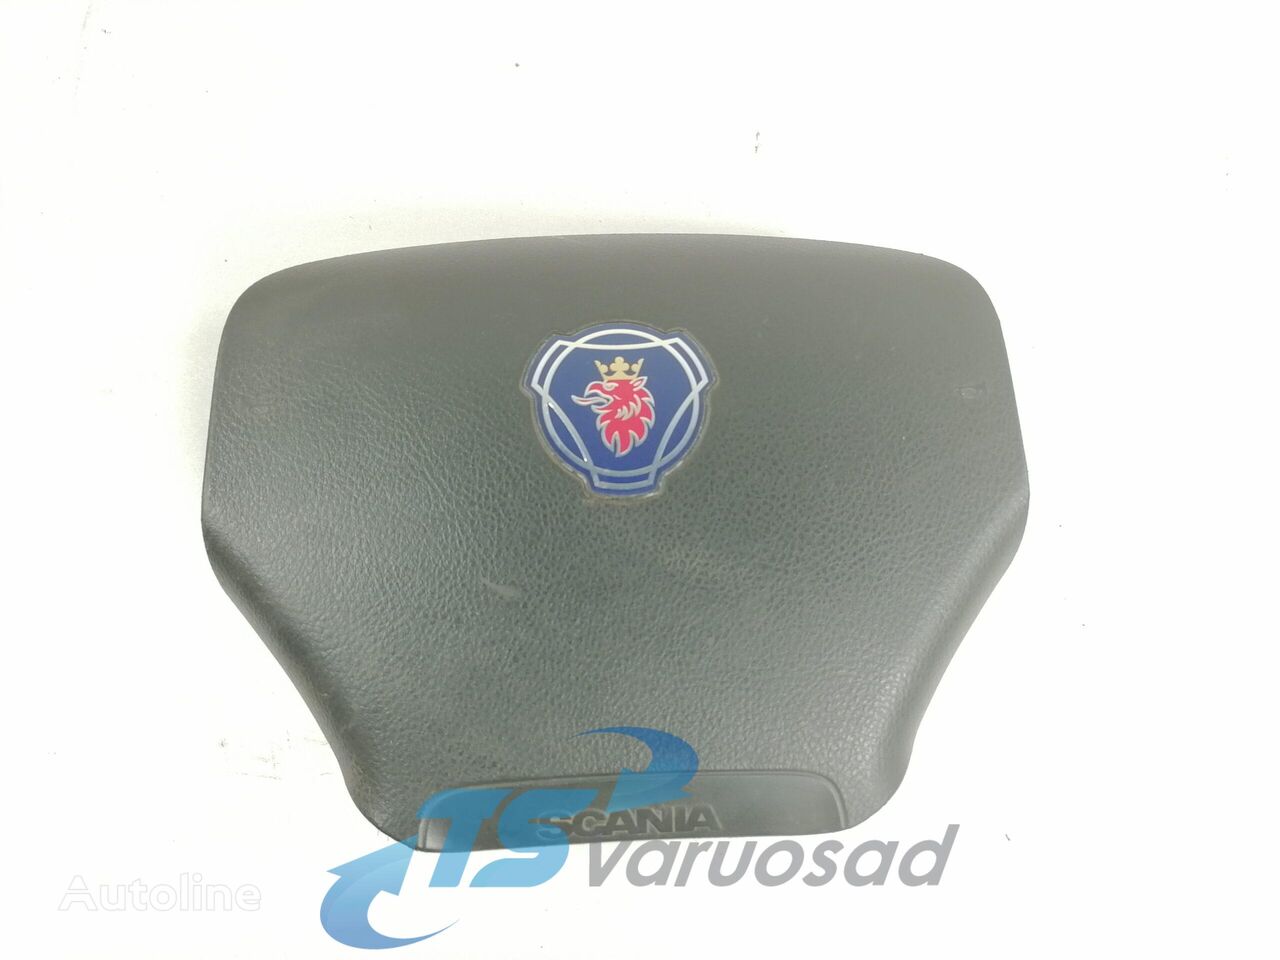 Scania Steering wheel cover 1495396 front fascia for Scania R420 truck tractor